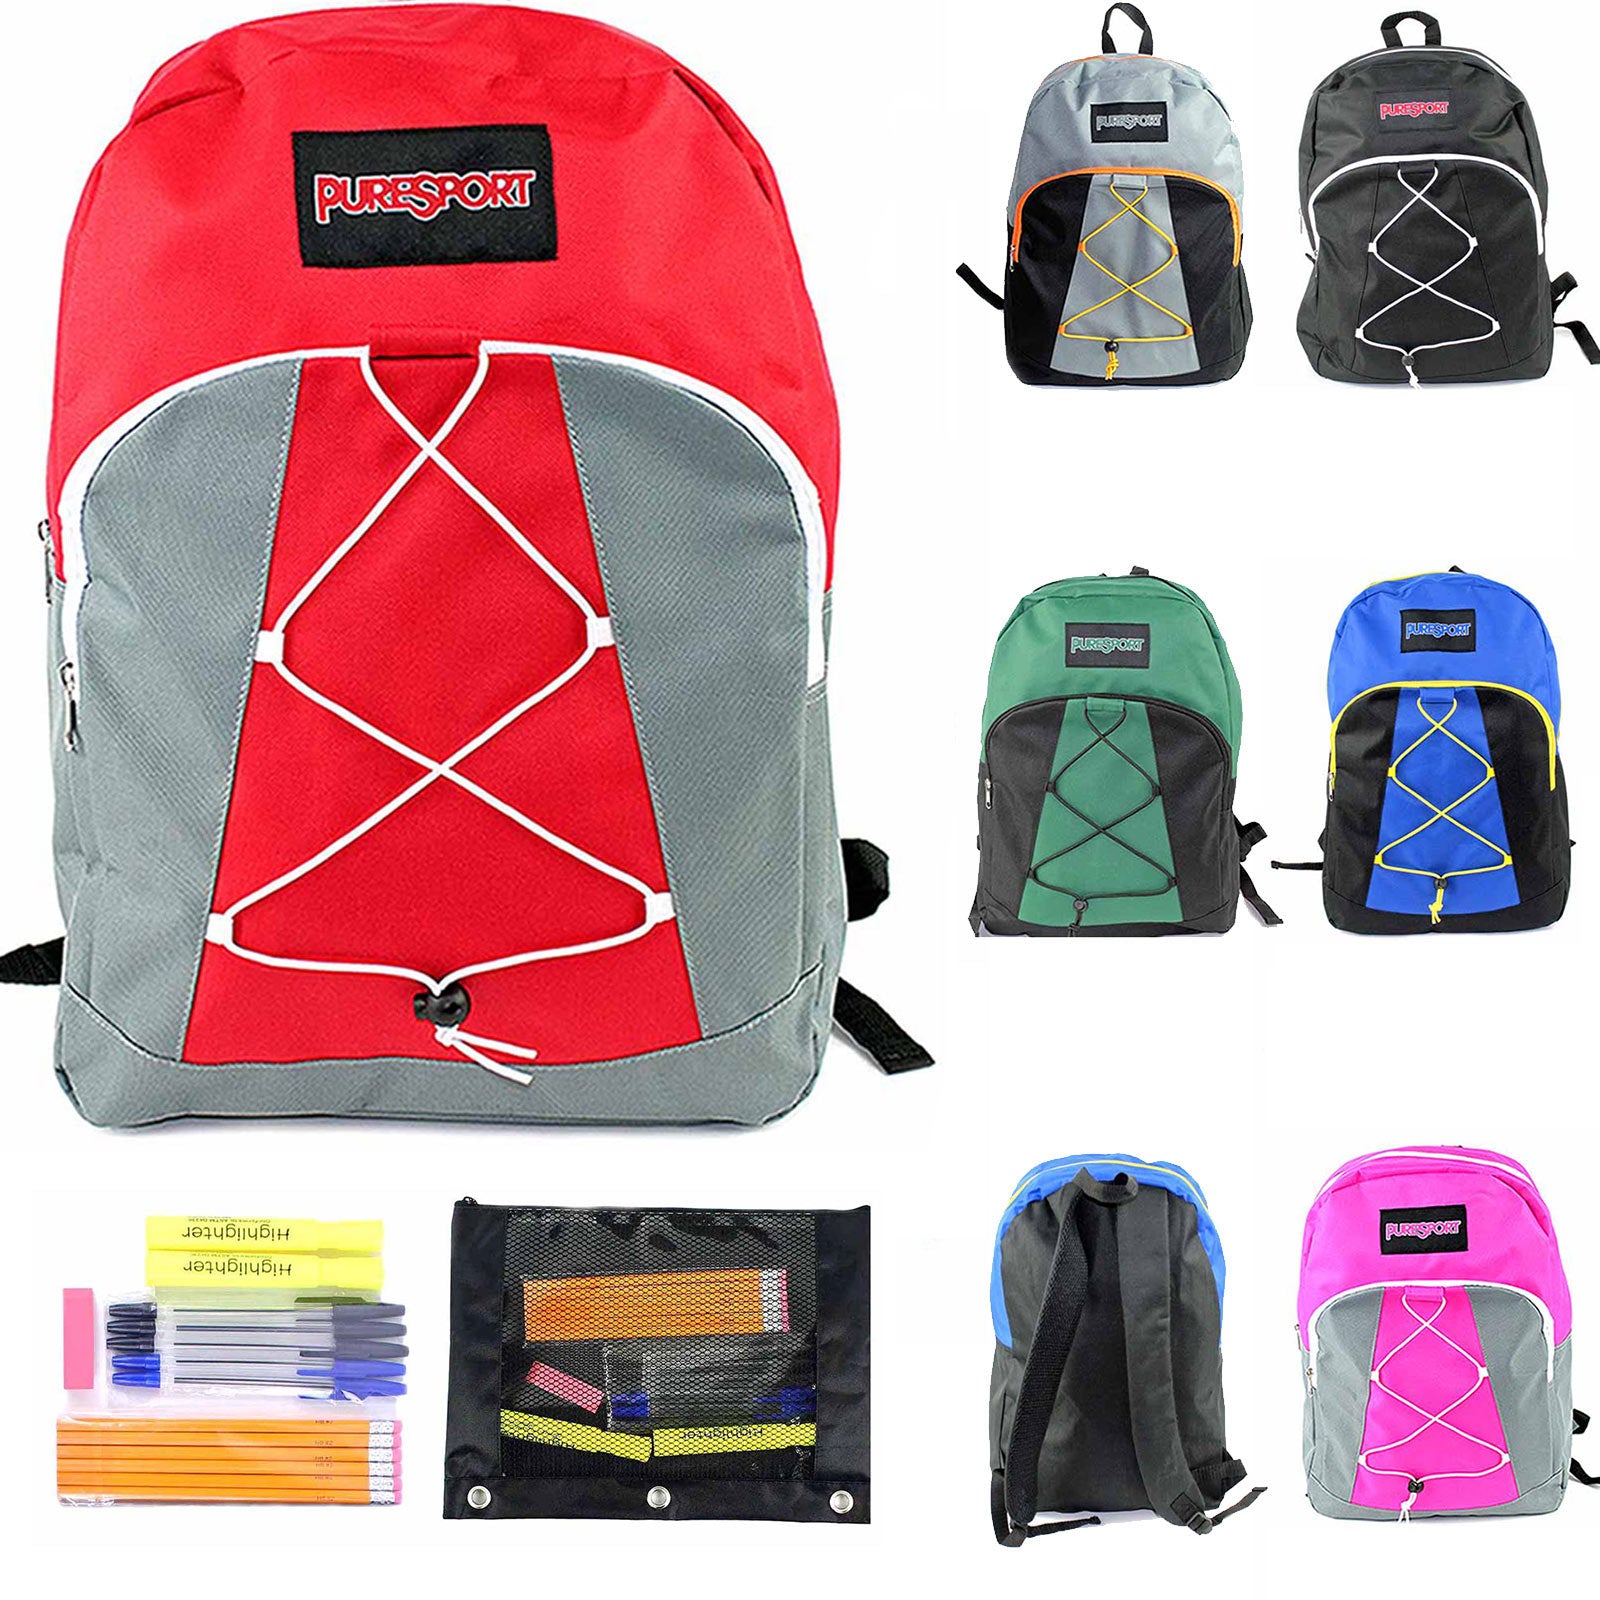 bungee backpacks in assorted colors wholesale with school supply kits